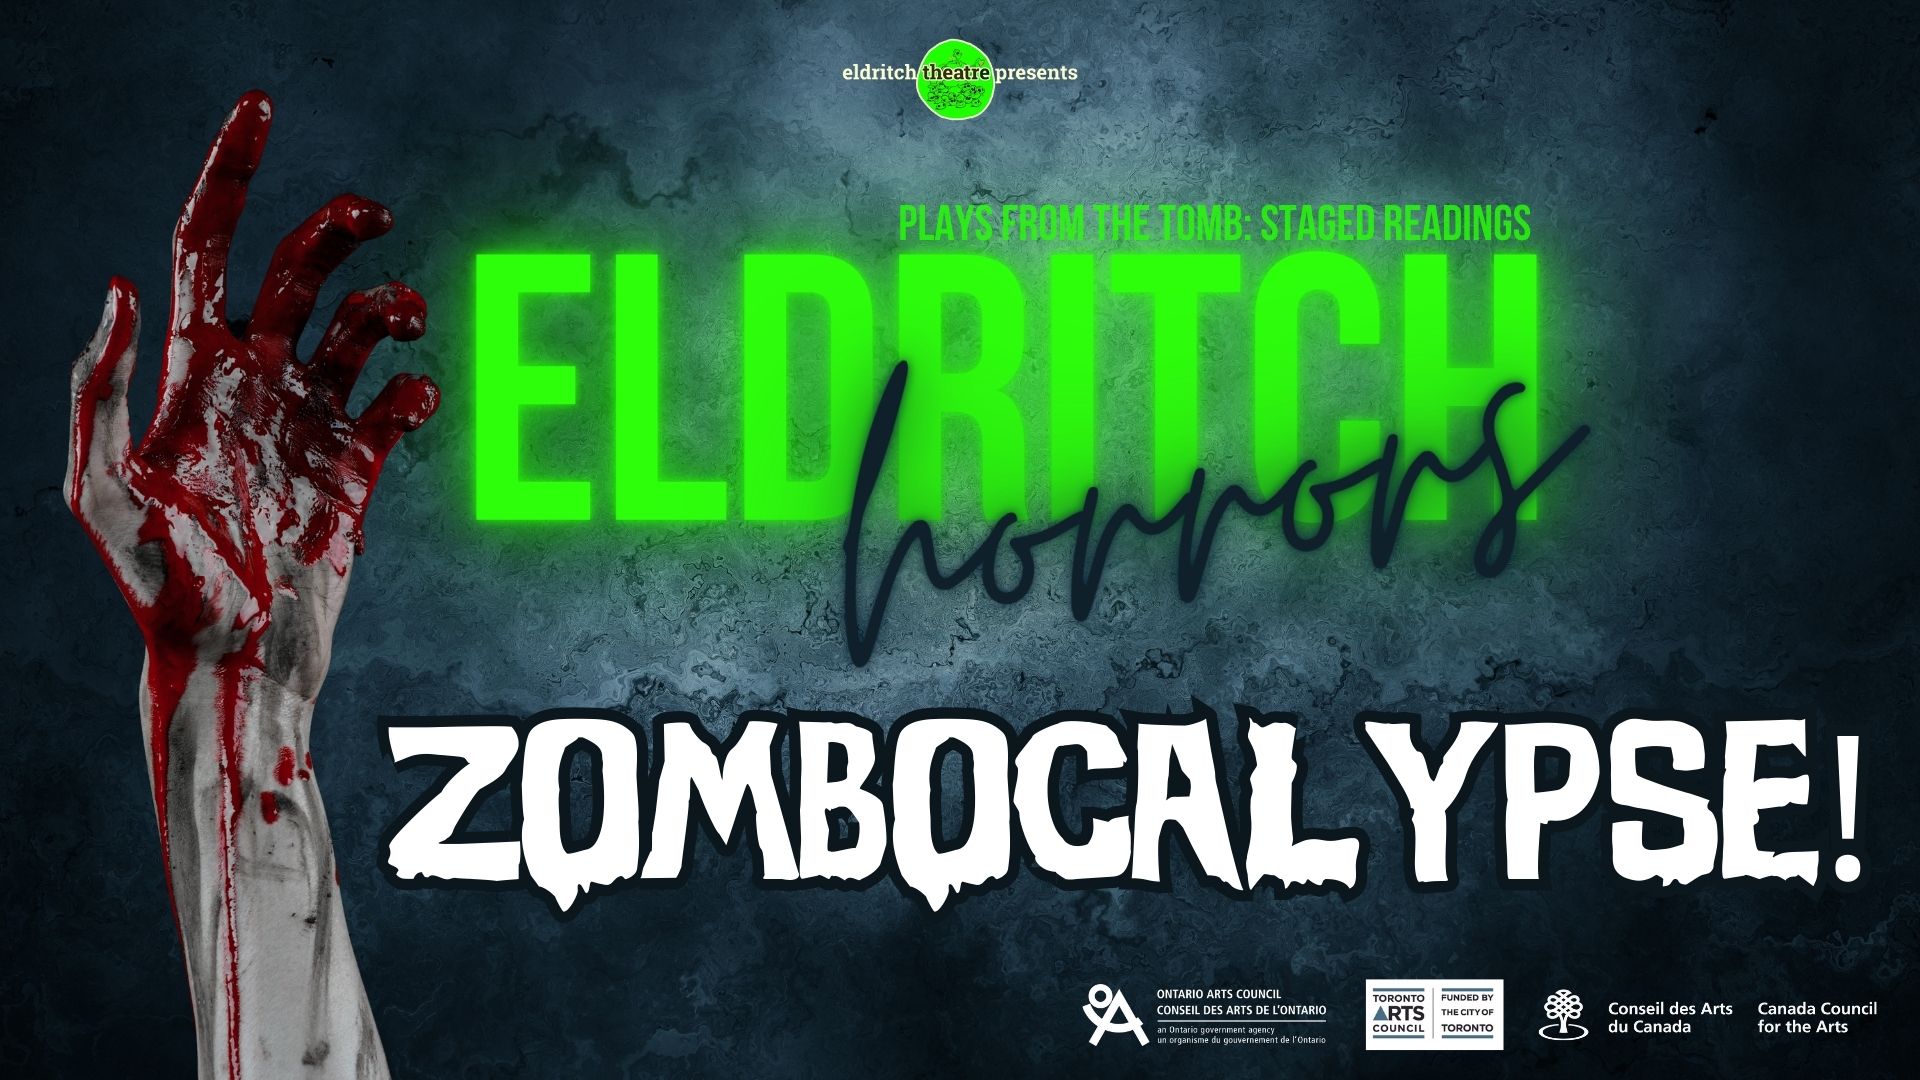 Eldritch Horrors: Plays From The Tomb ZOMBOCALYPSE